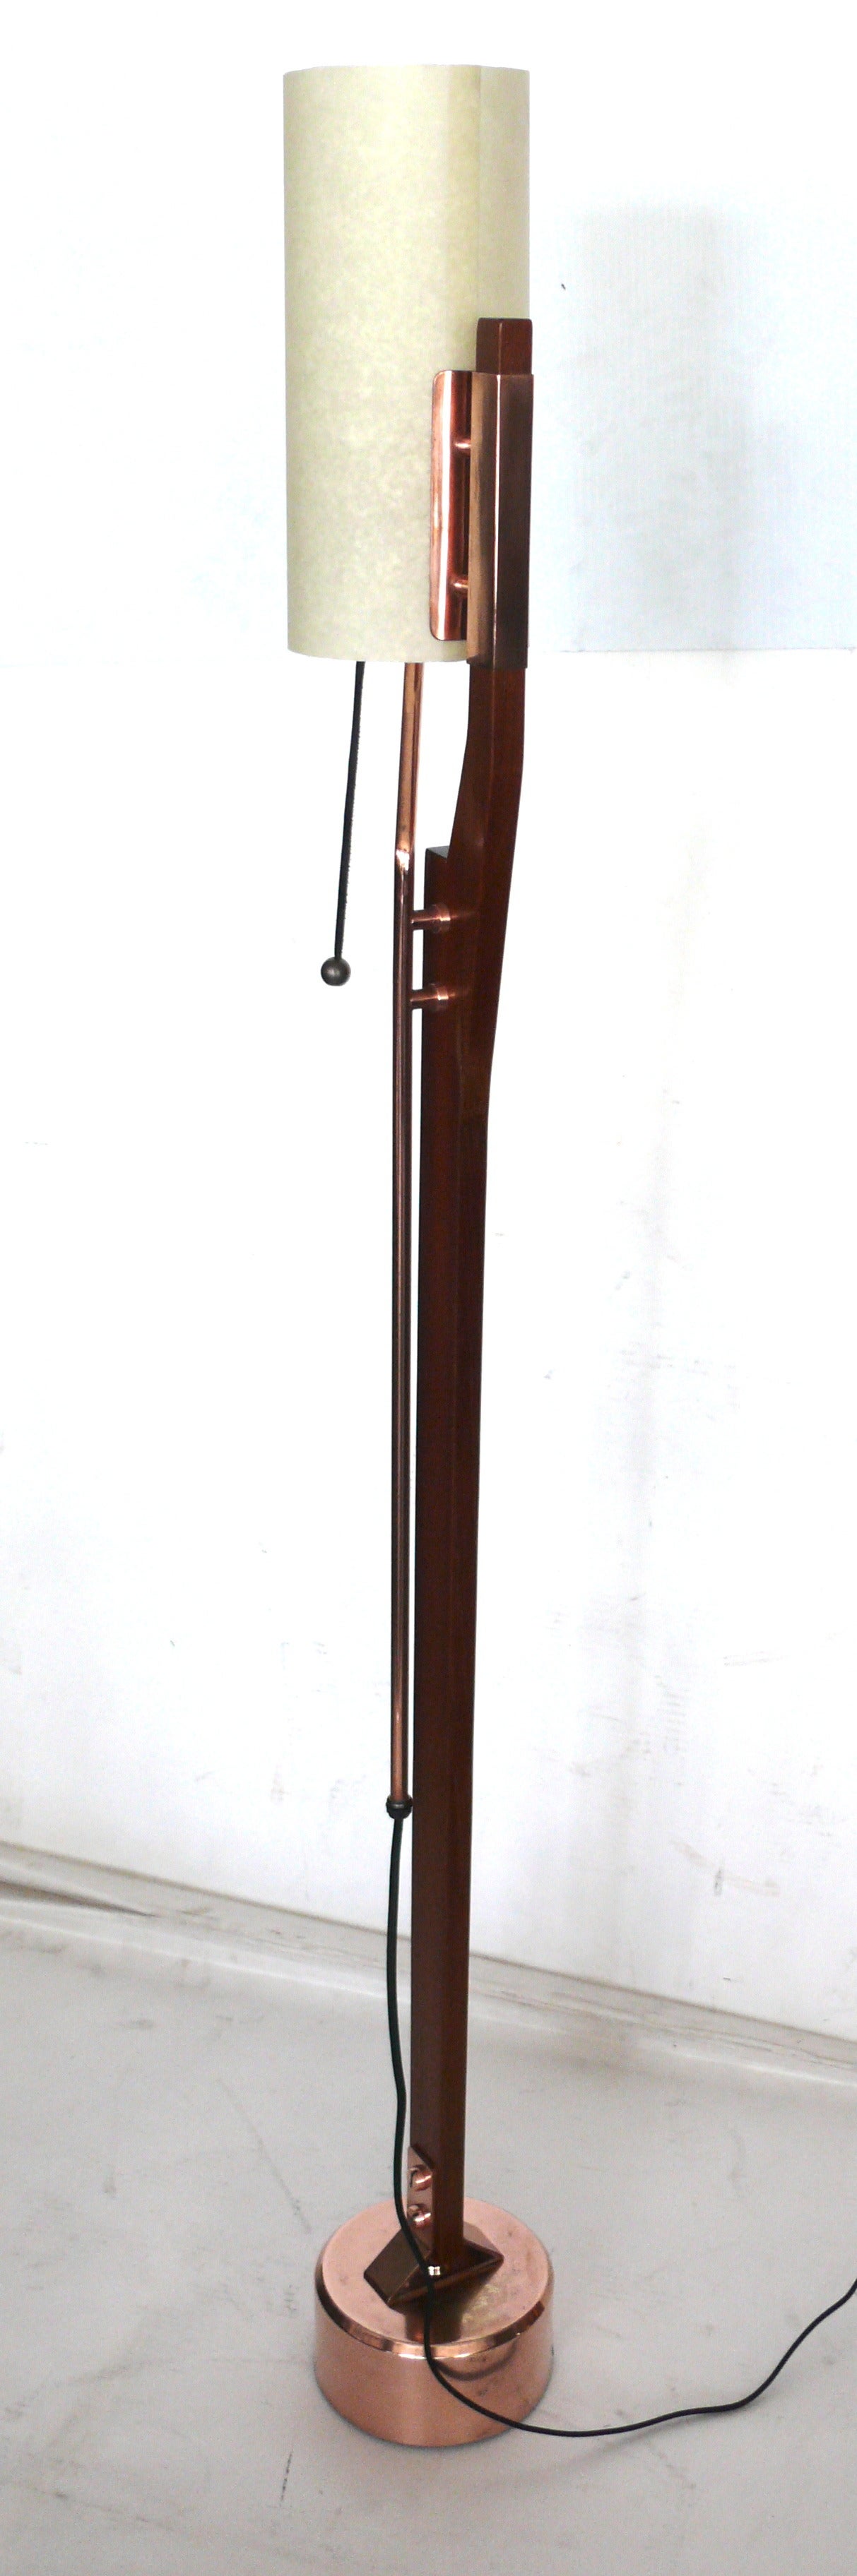 Unique Floor Lamp by Orrefors at 1stdibs